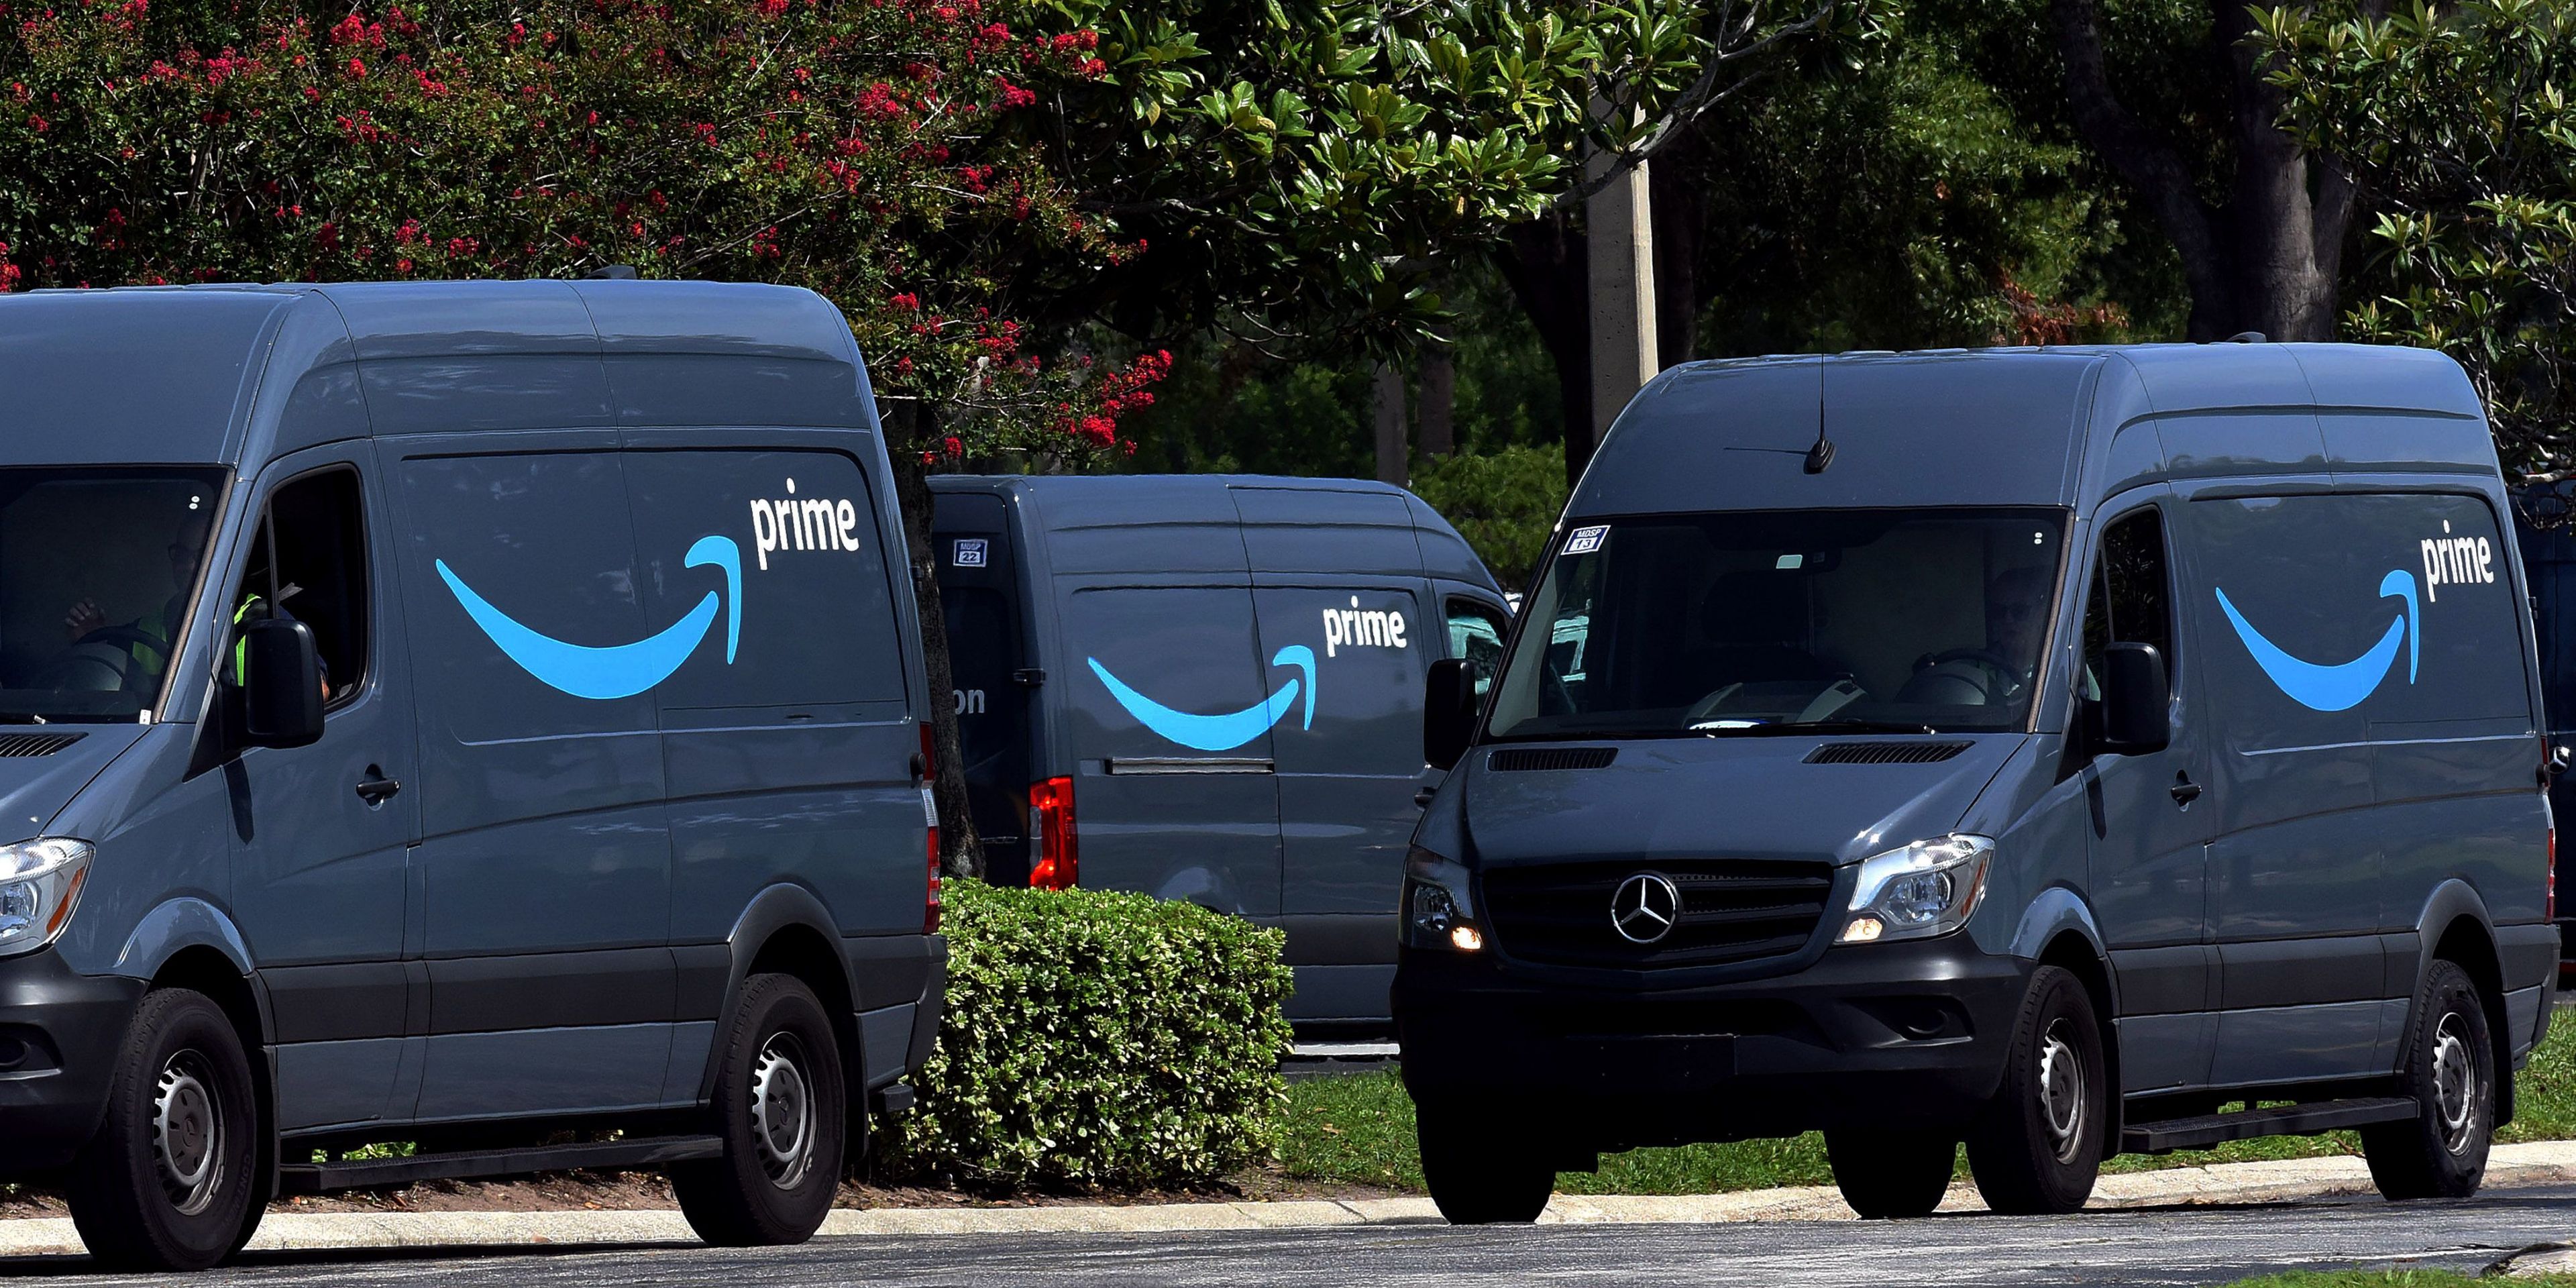 Why Amazon Prime Orders Are Taking So Much Longer to Deliver